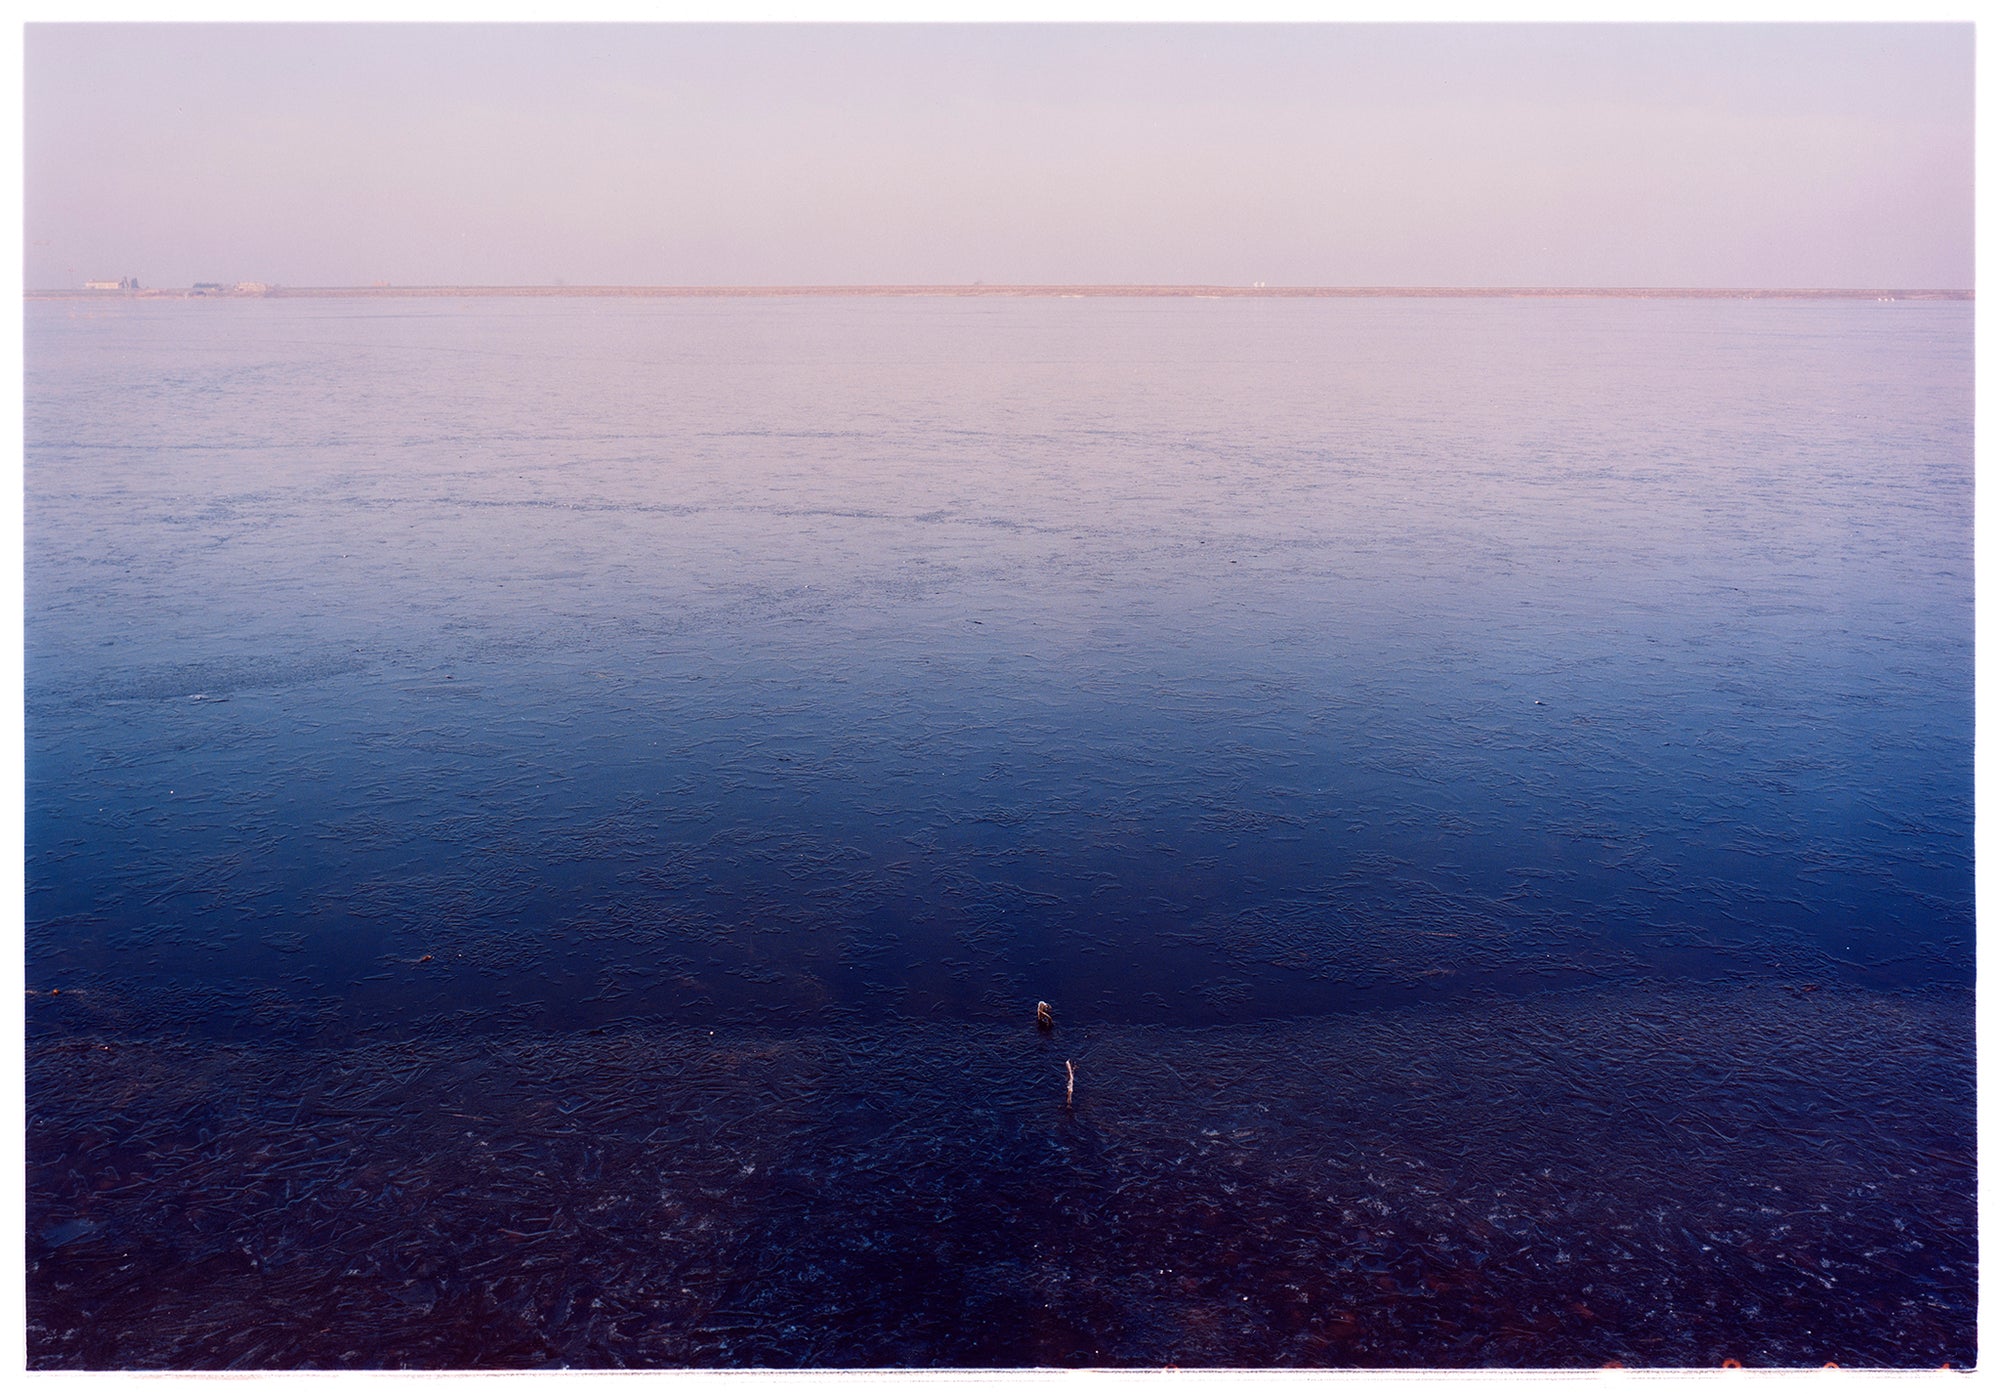 Photograph by Richard Heeps. This photograph is looking towards the water. From a distance you can see two blocks of colour, blue at the bottom and lilac at the top, closer up you see the move of the water and a thin land strip along the horizon.